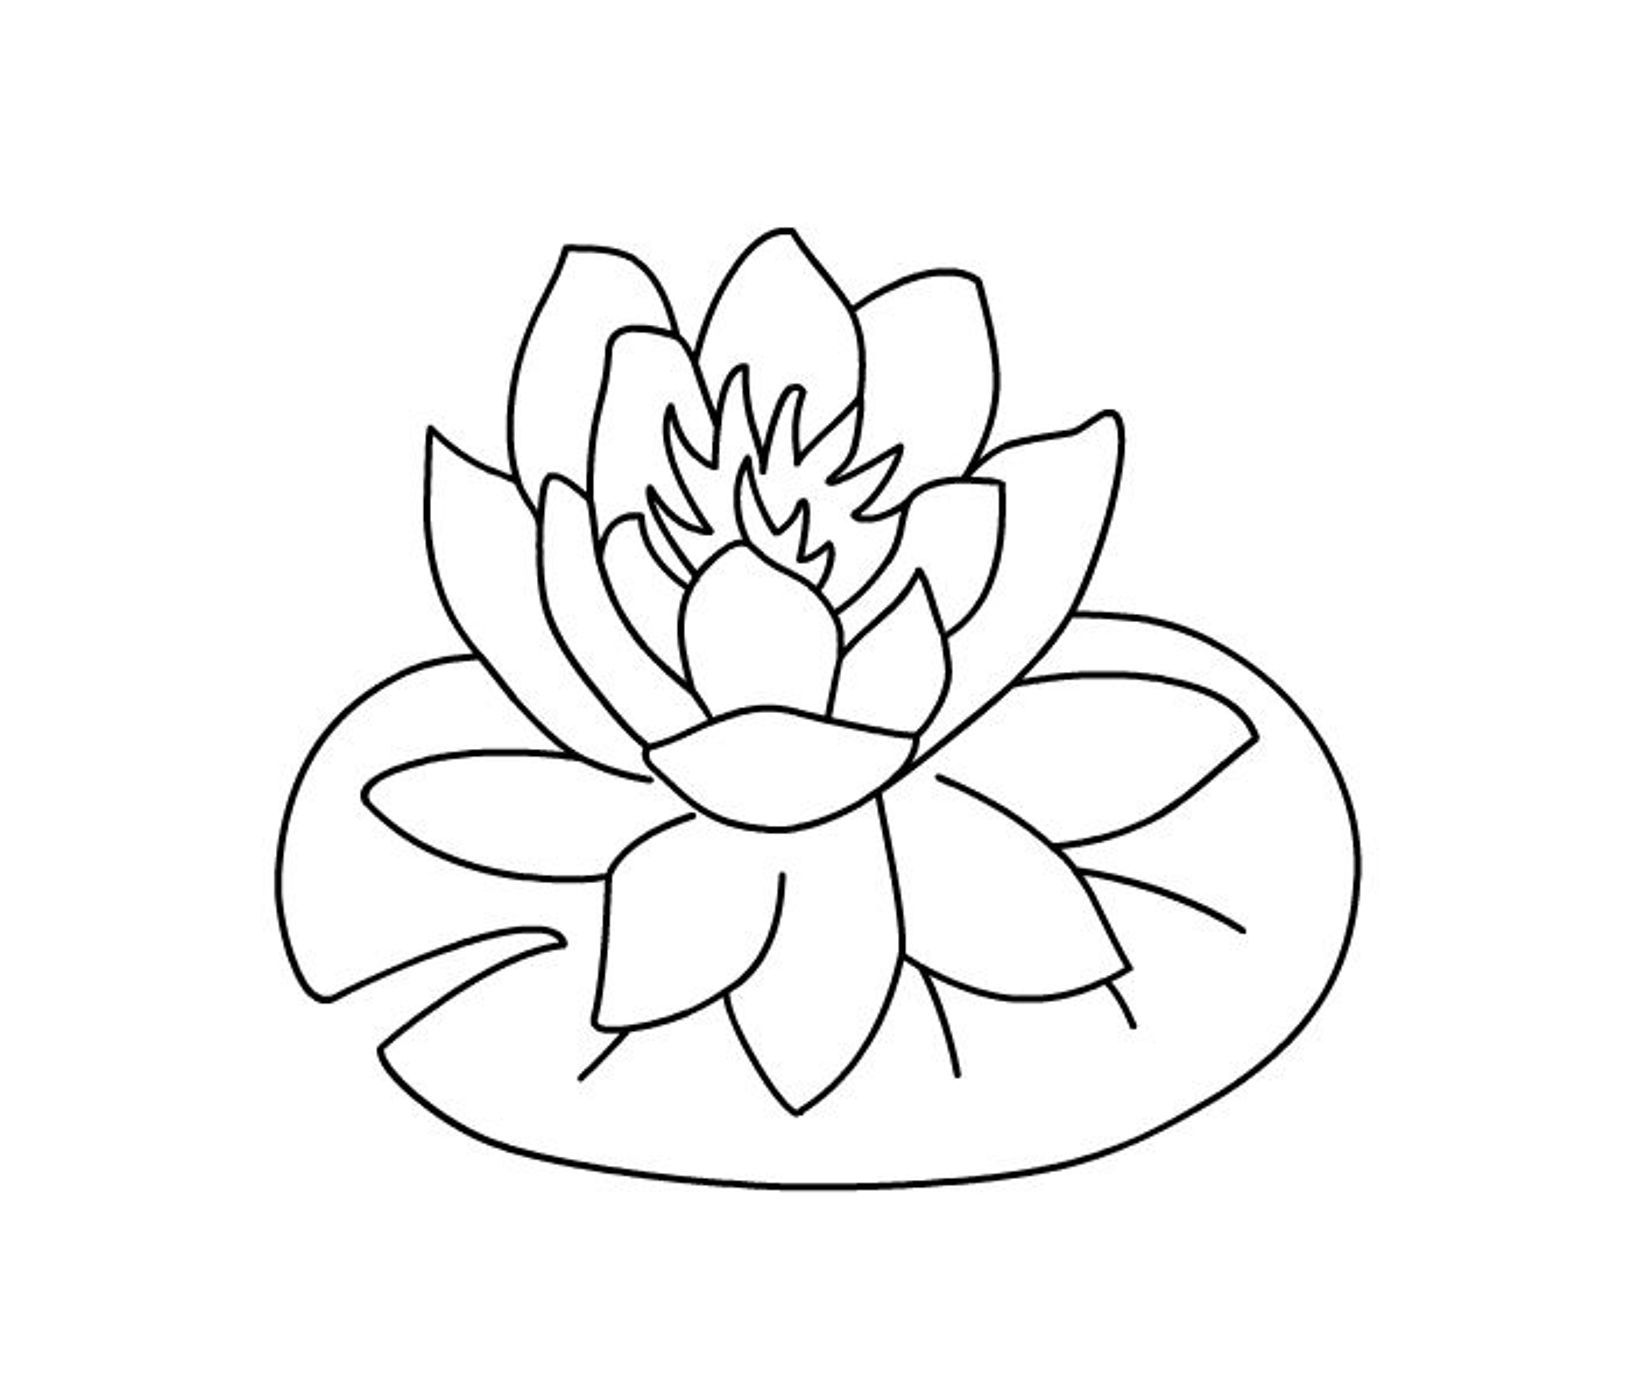 Printable Hibiscus Flower Coloring Pages | Cooloring.com